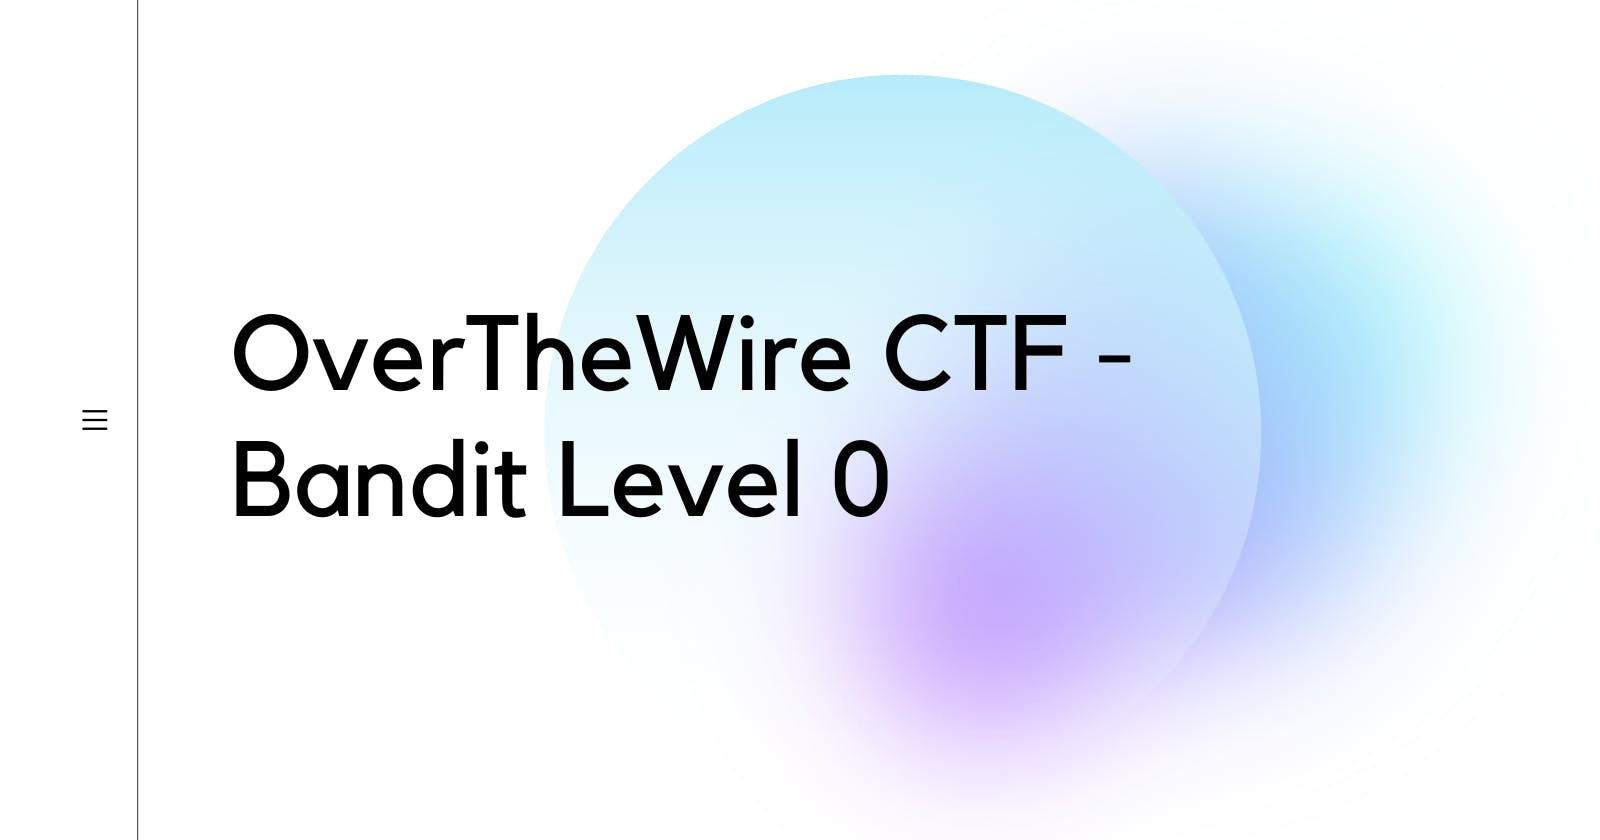 OverTheWire CTF - Bandit Level 0 - How to Remotely Log Into a Machine Using SSH